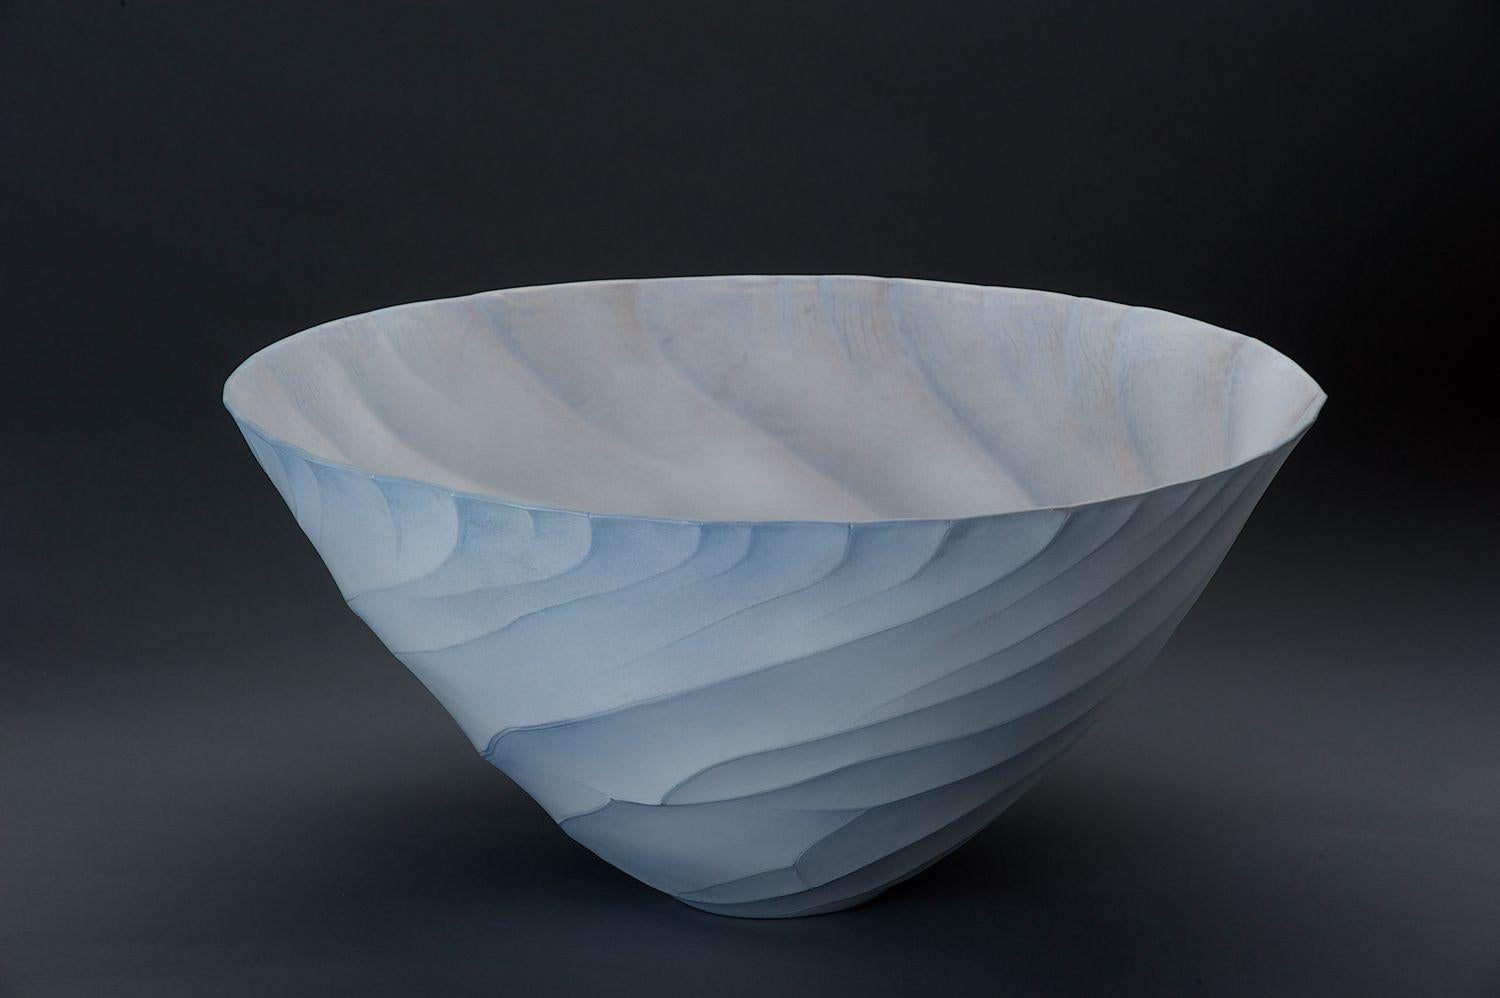 Contemporary Porcelain Bowl / Vessel by Ceramic Artist, Paula Murray, Light Blue

A contemporary porcelain bowl of the 'Radiant Acquiescence' series by world renowned ceramic artist, Paula Murray. Direct from the artist's personal